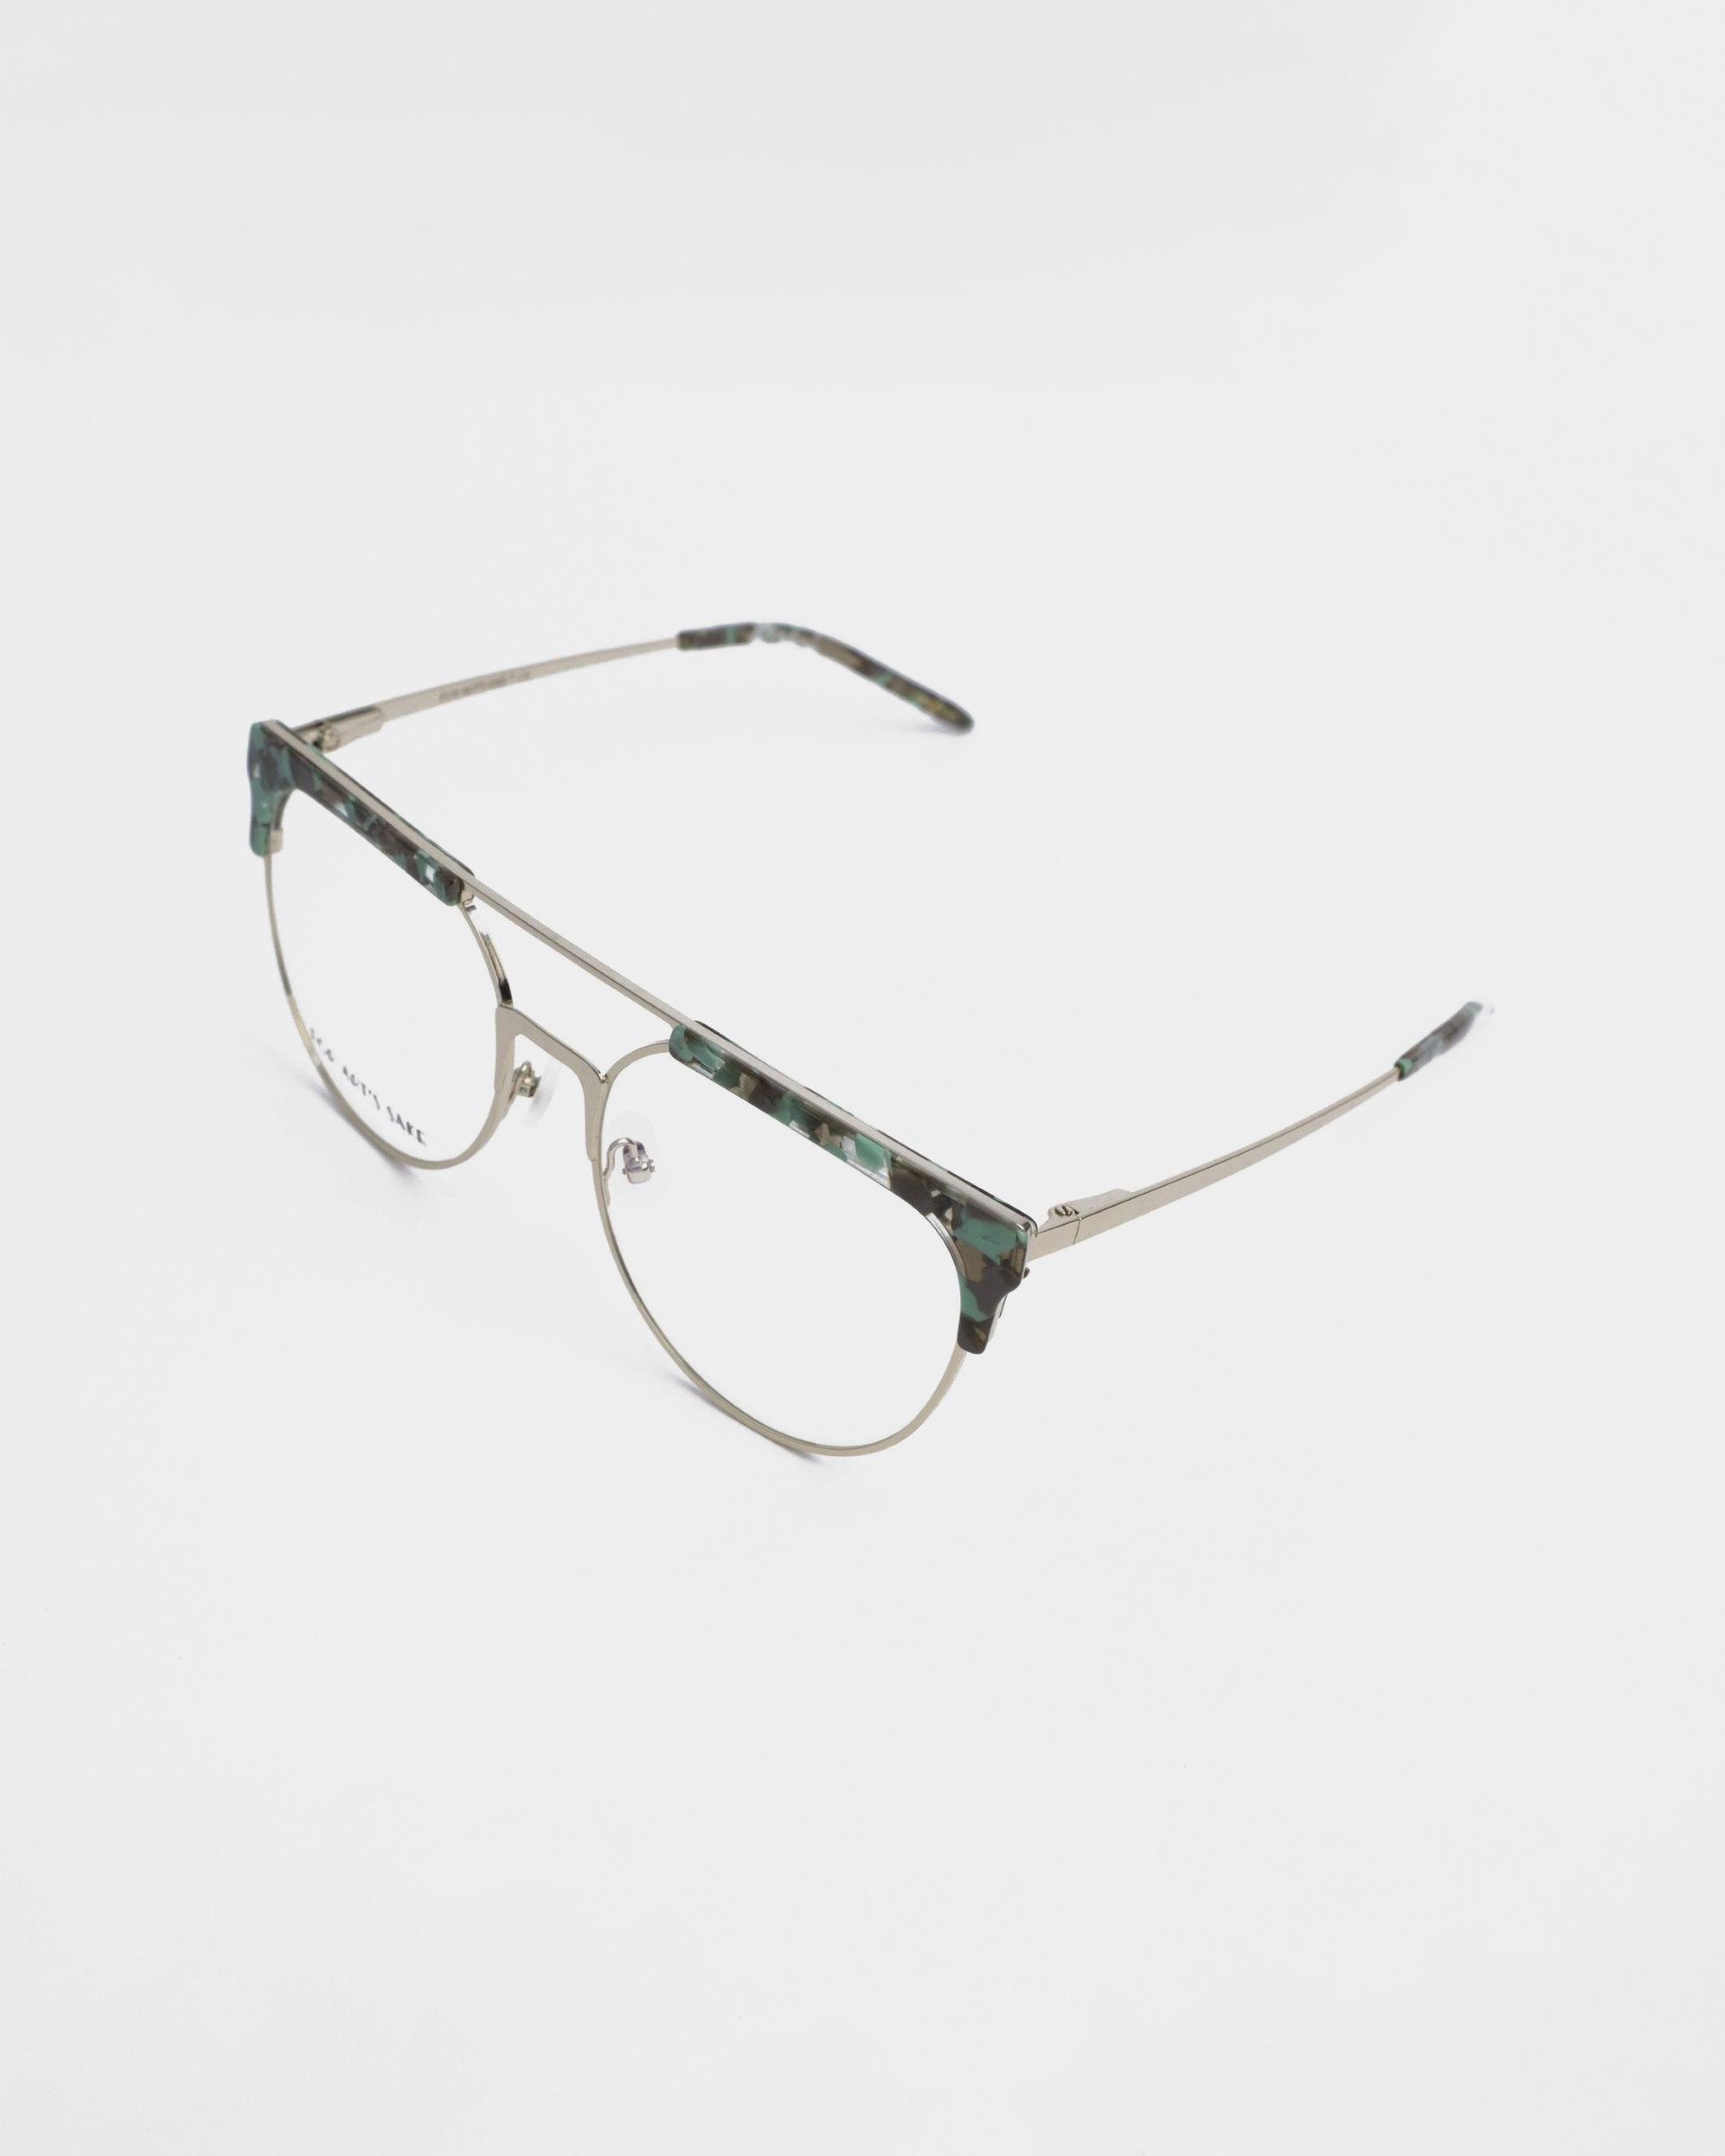 A pair of For Art&#39;s Sake® Frosty prescription glasses featuring thin metallic frames with a camouflage-patterned brow line and bridge. The earpieces are slim and also metallic, with matching camouflage accents on the tips. The clear, rectangular lenses offer both UV protection and a blue light filter for added eye comfort.